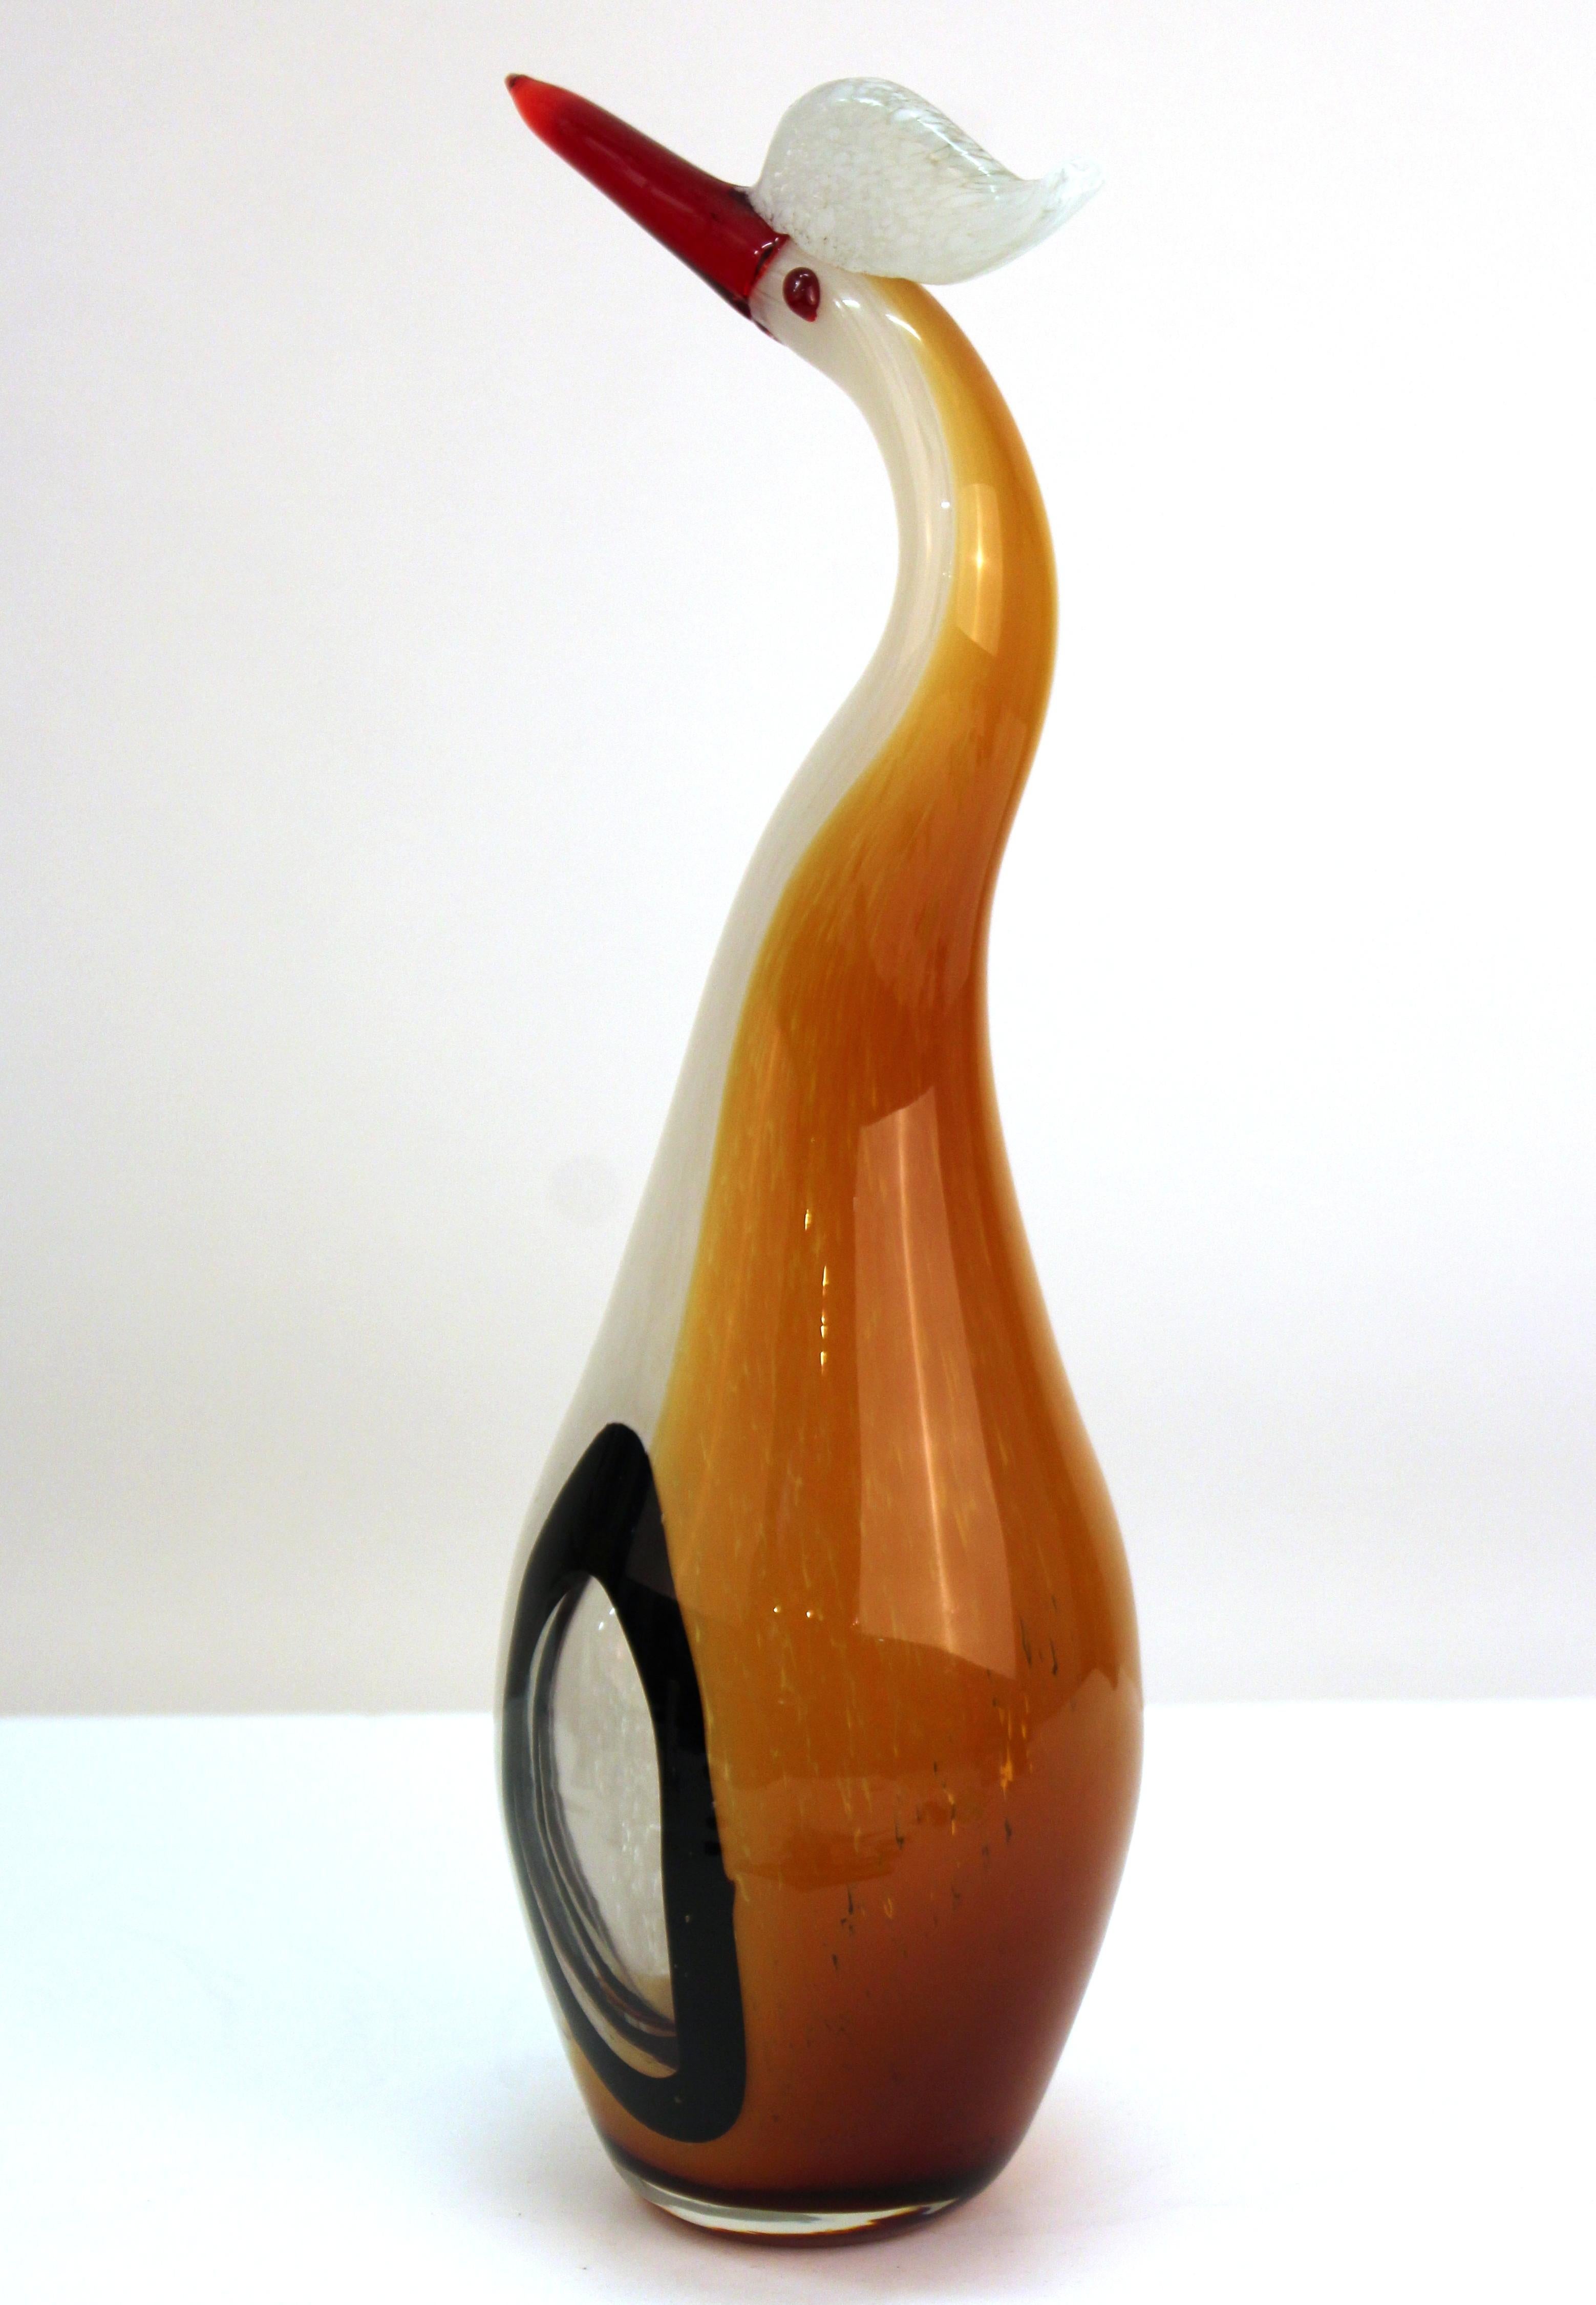 Italian Mid-Century Modern hand blown Murano glass bird sculpture. The piece was likely made during the 1960s in Italy and is in great vintage condition, with very minor wear to the bottom of the base.